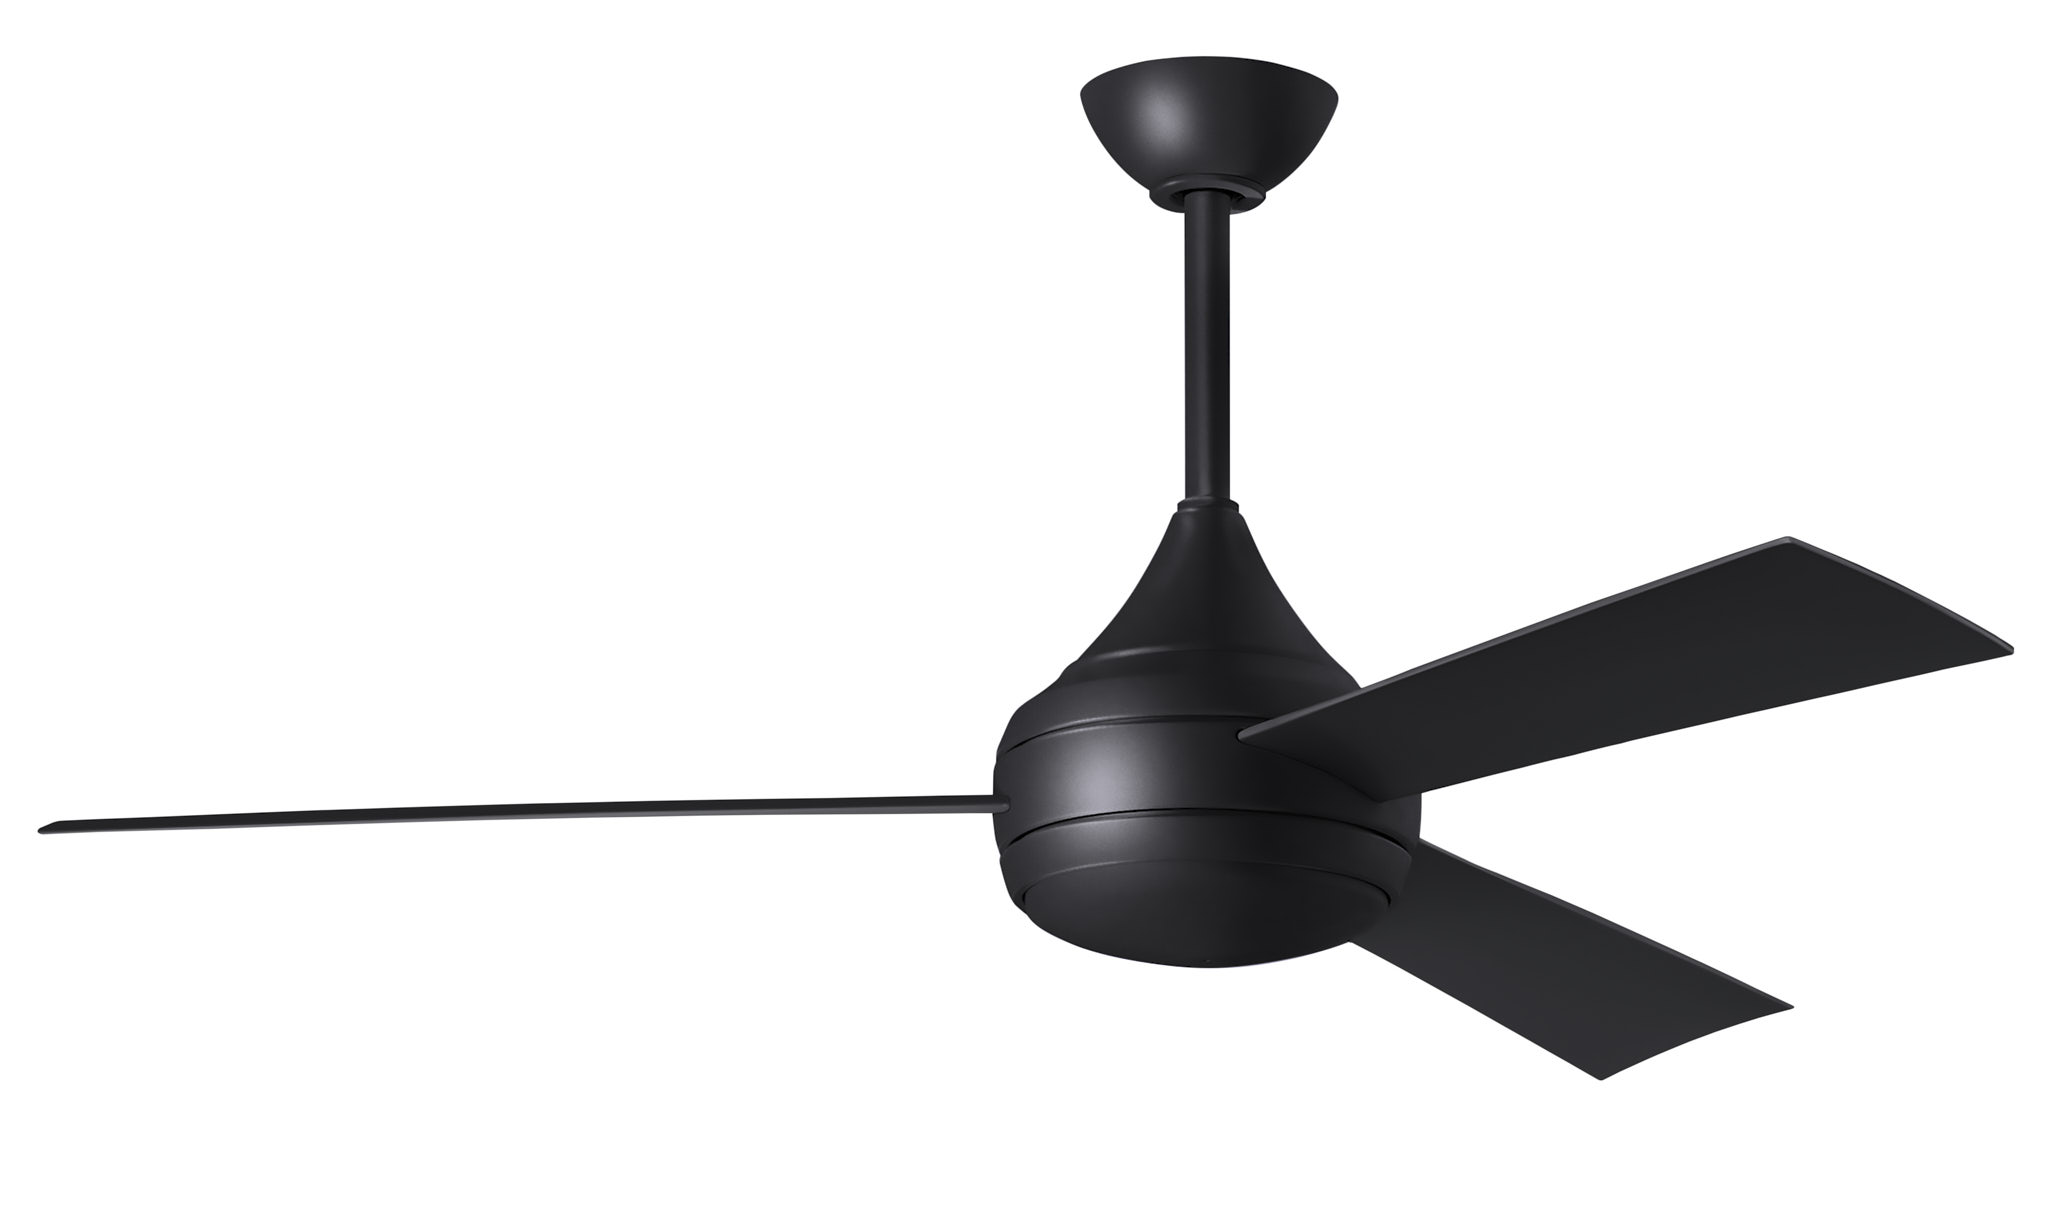 Donaire ceiling fan in Matte Black with Black blades with light cap manufactured by Matthews Fan Company.